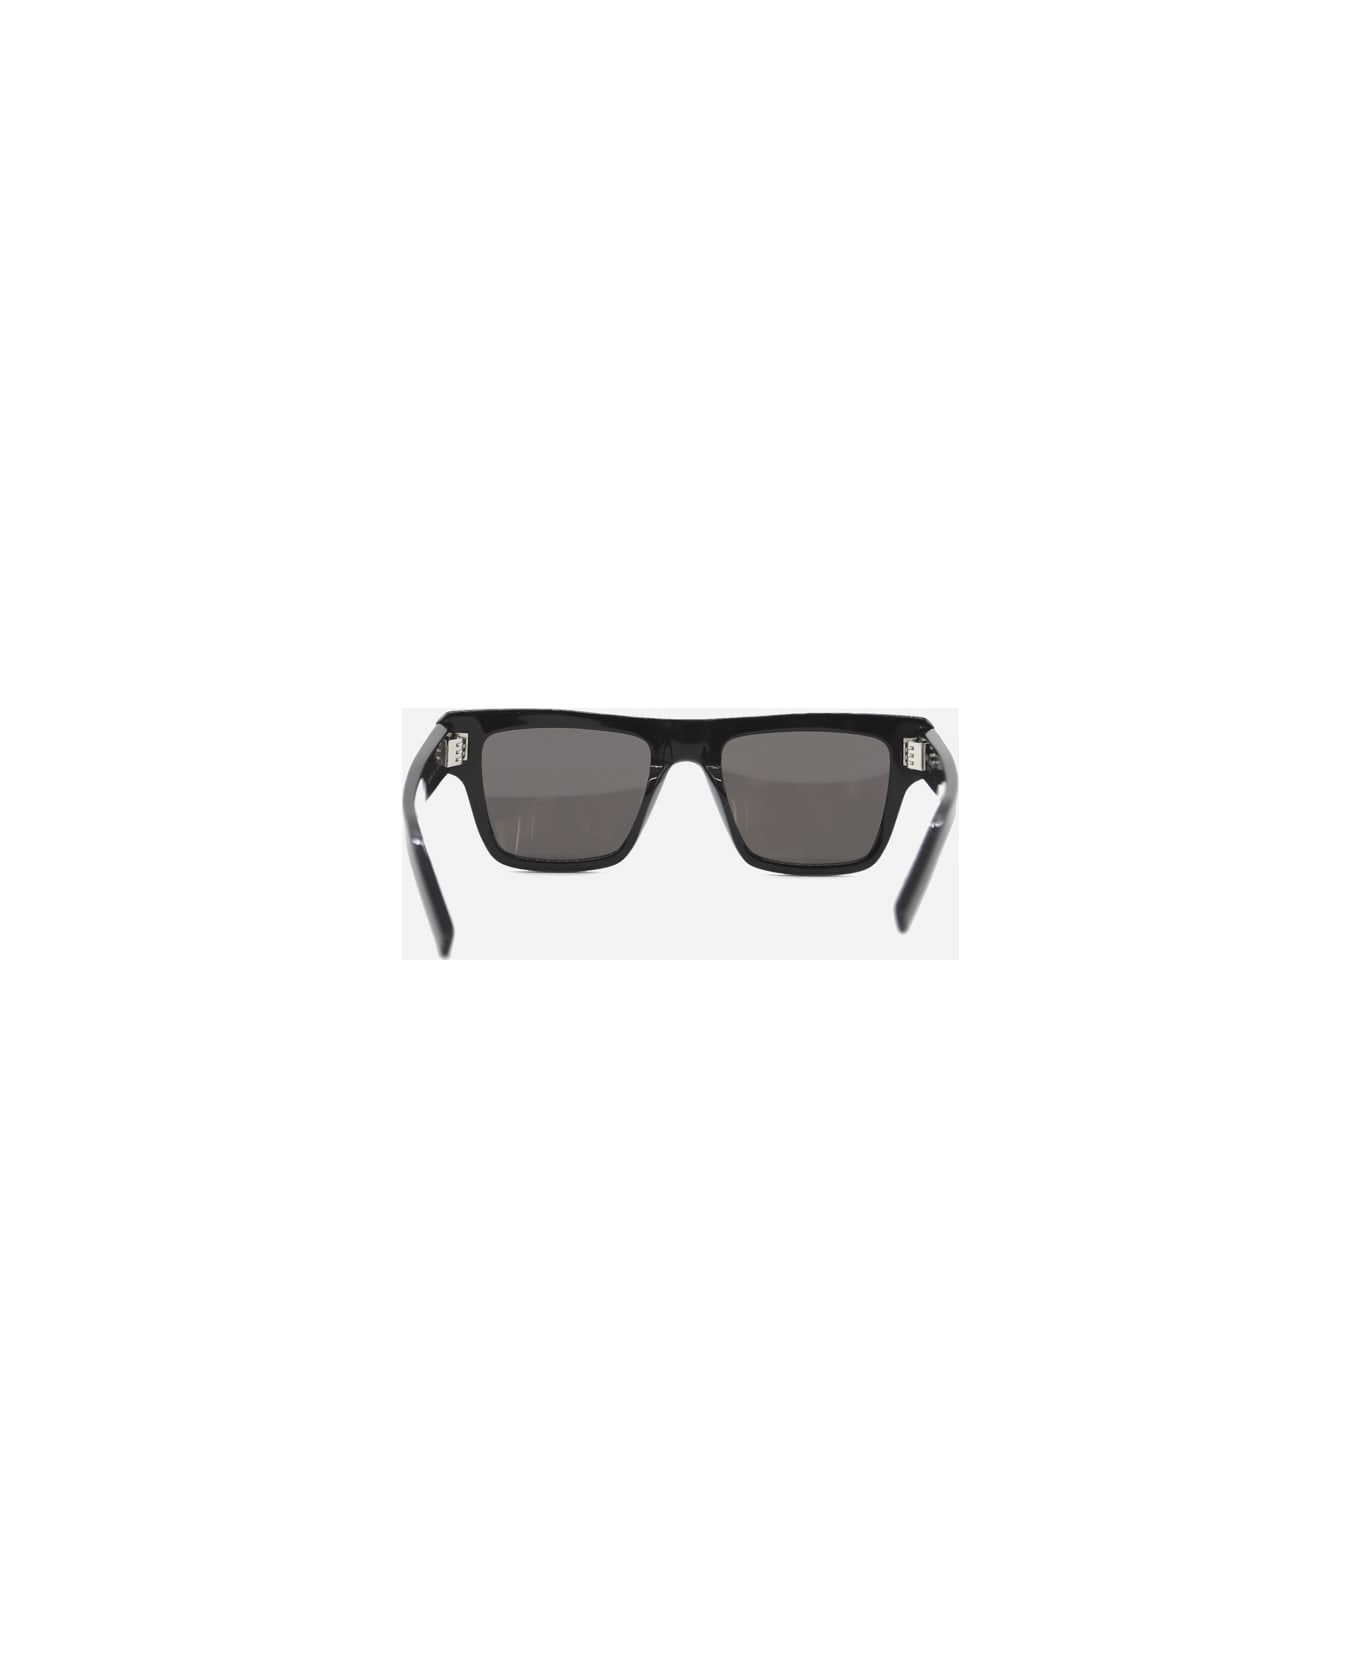 Saint Laurent Sl469 Sunglasses In Acetate With Engraved Logo On Temples - Black